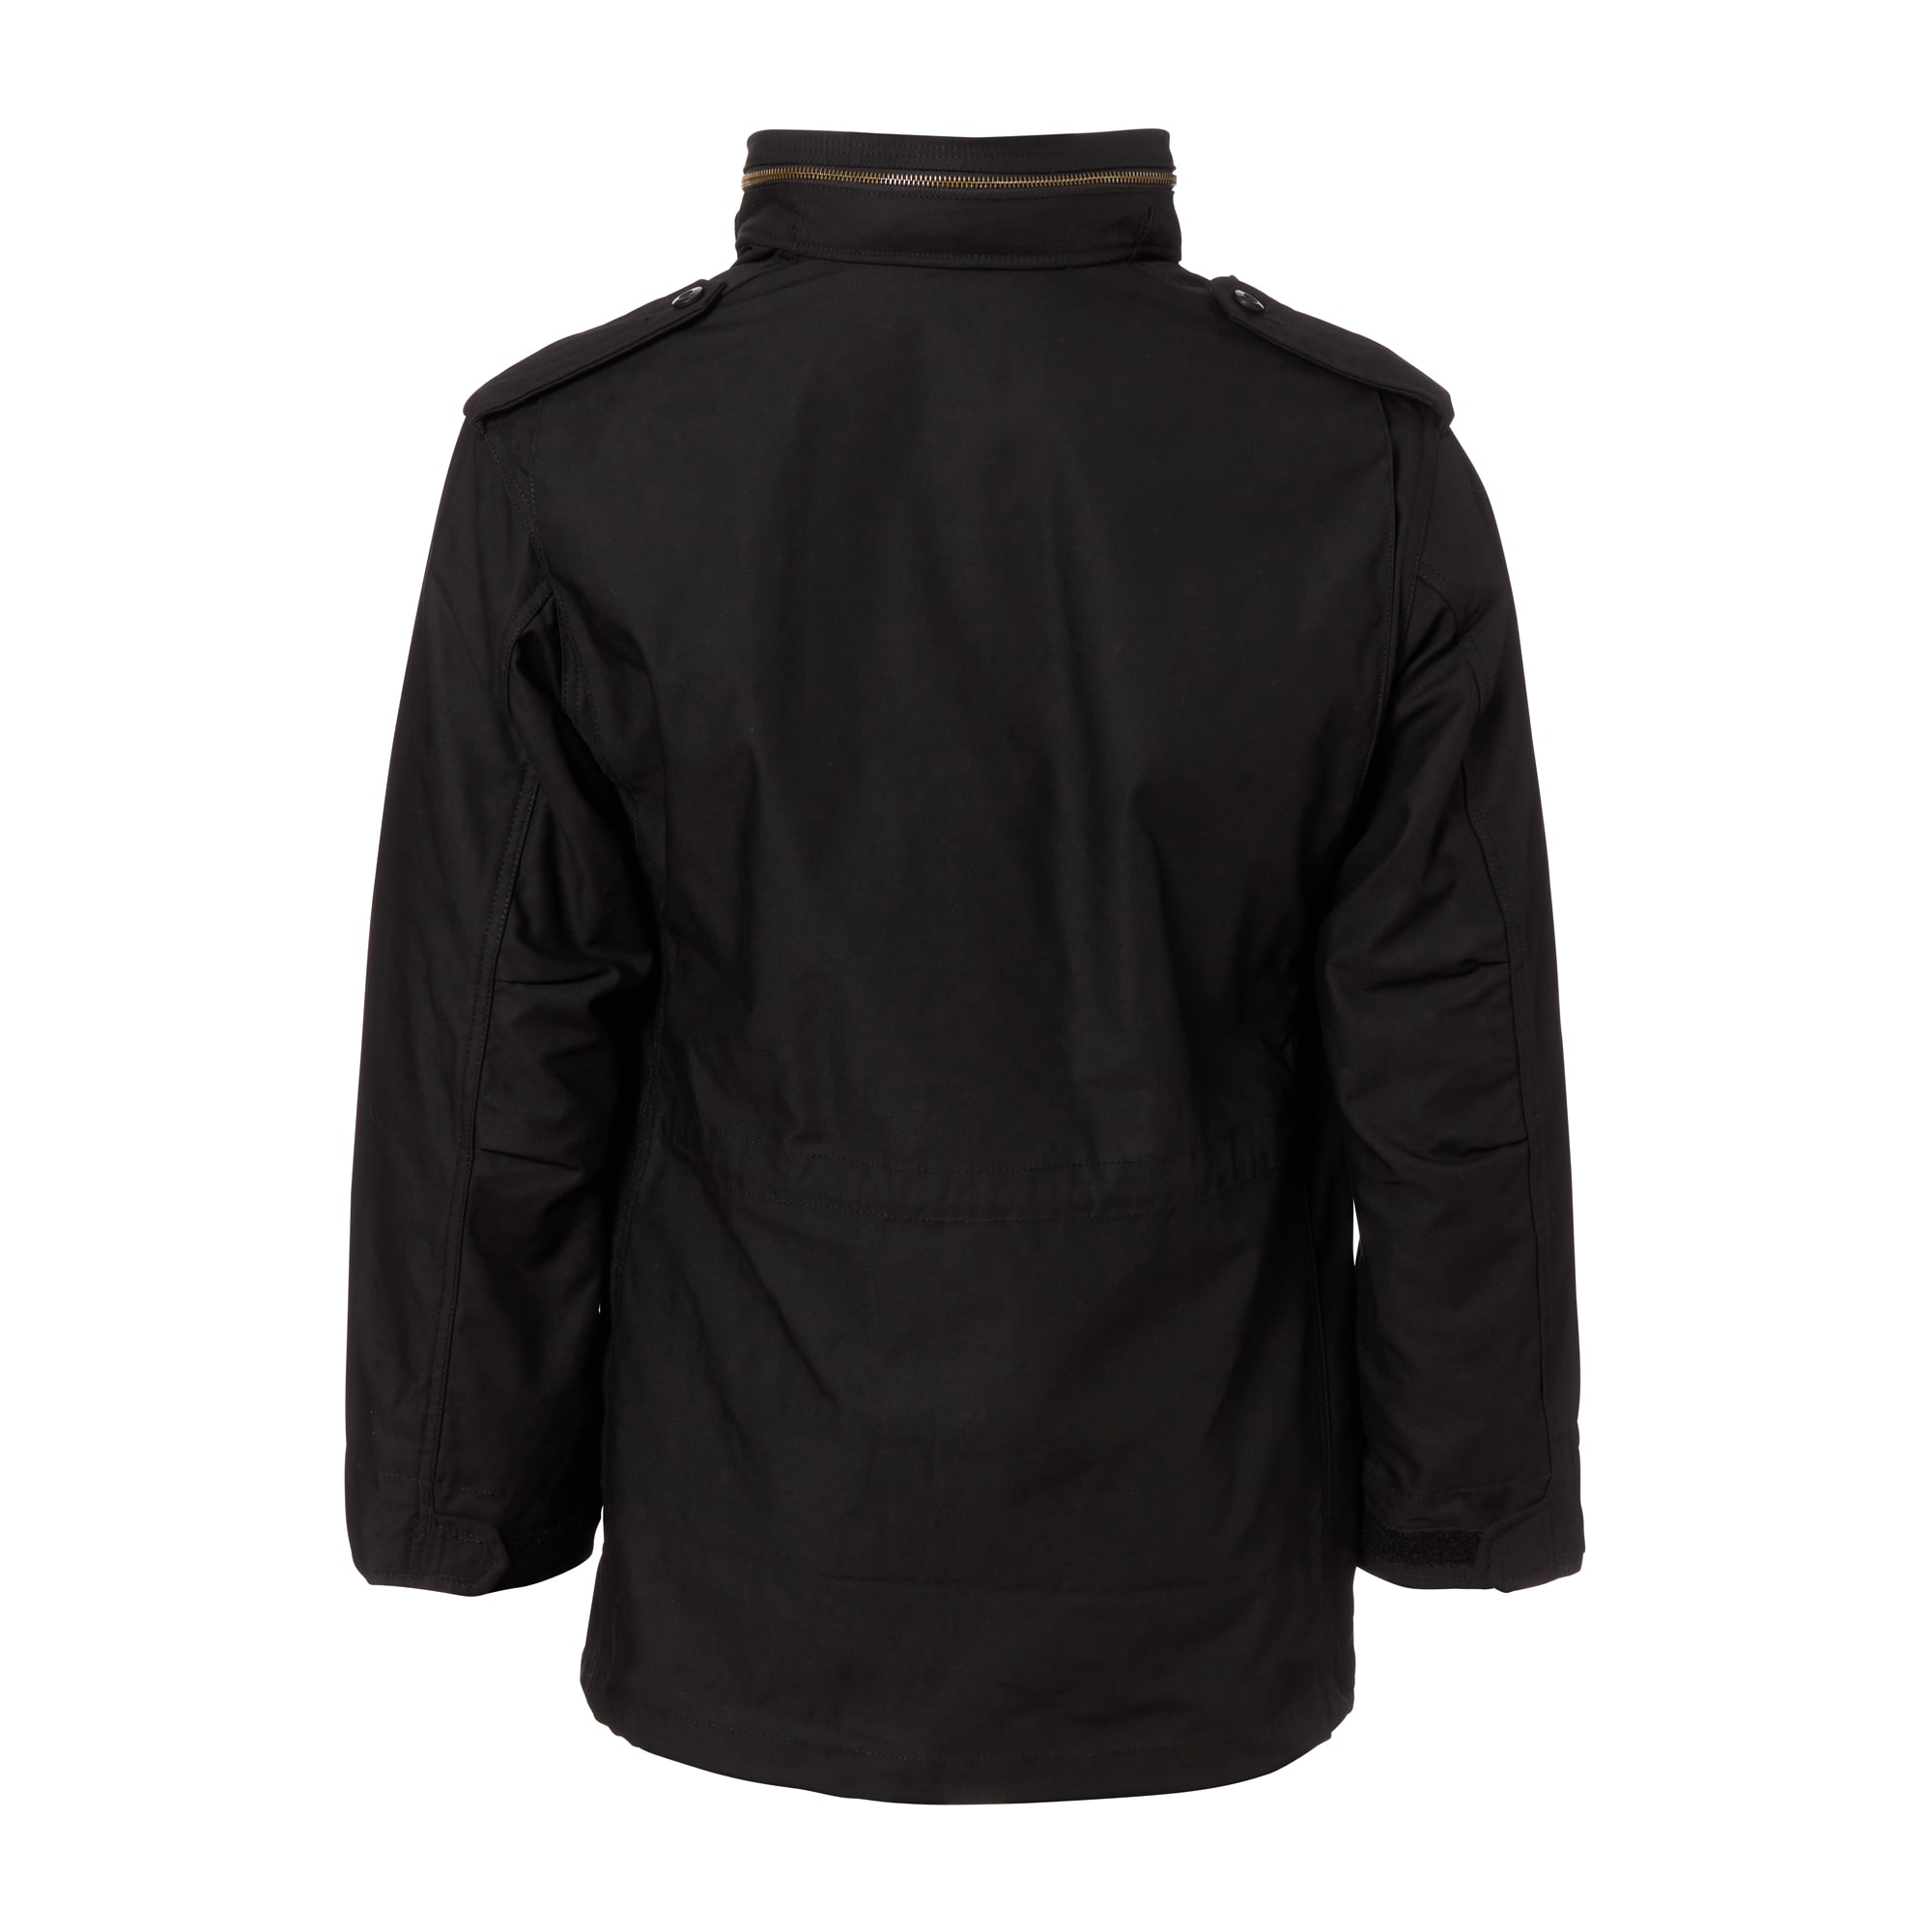 Purchase the Field Jacket M65 Alpha Industries black by ASMC